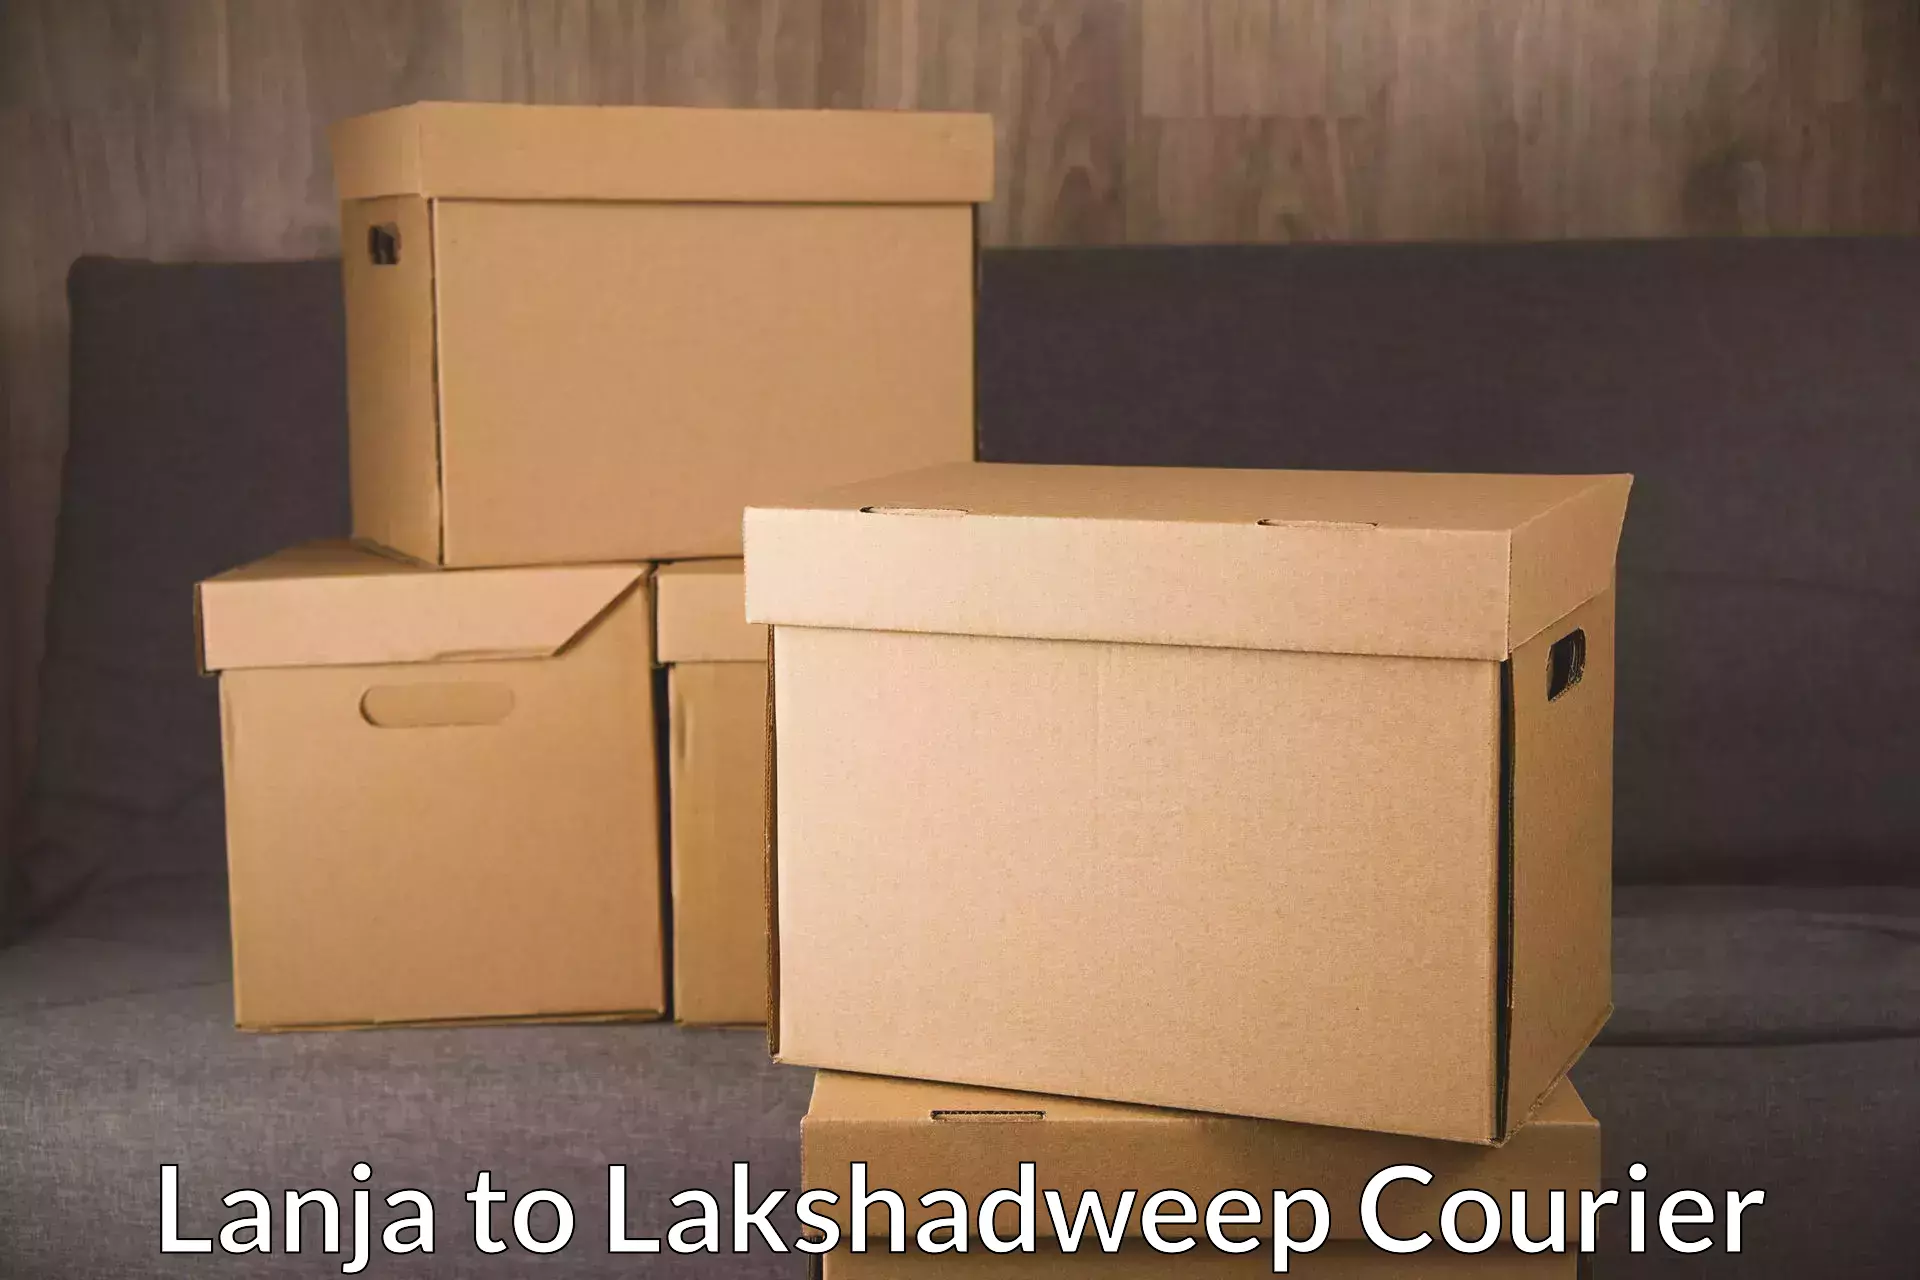 Courier service comparison Lanja to Lakshadweep